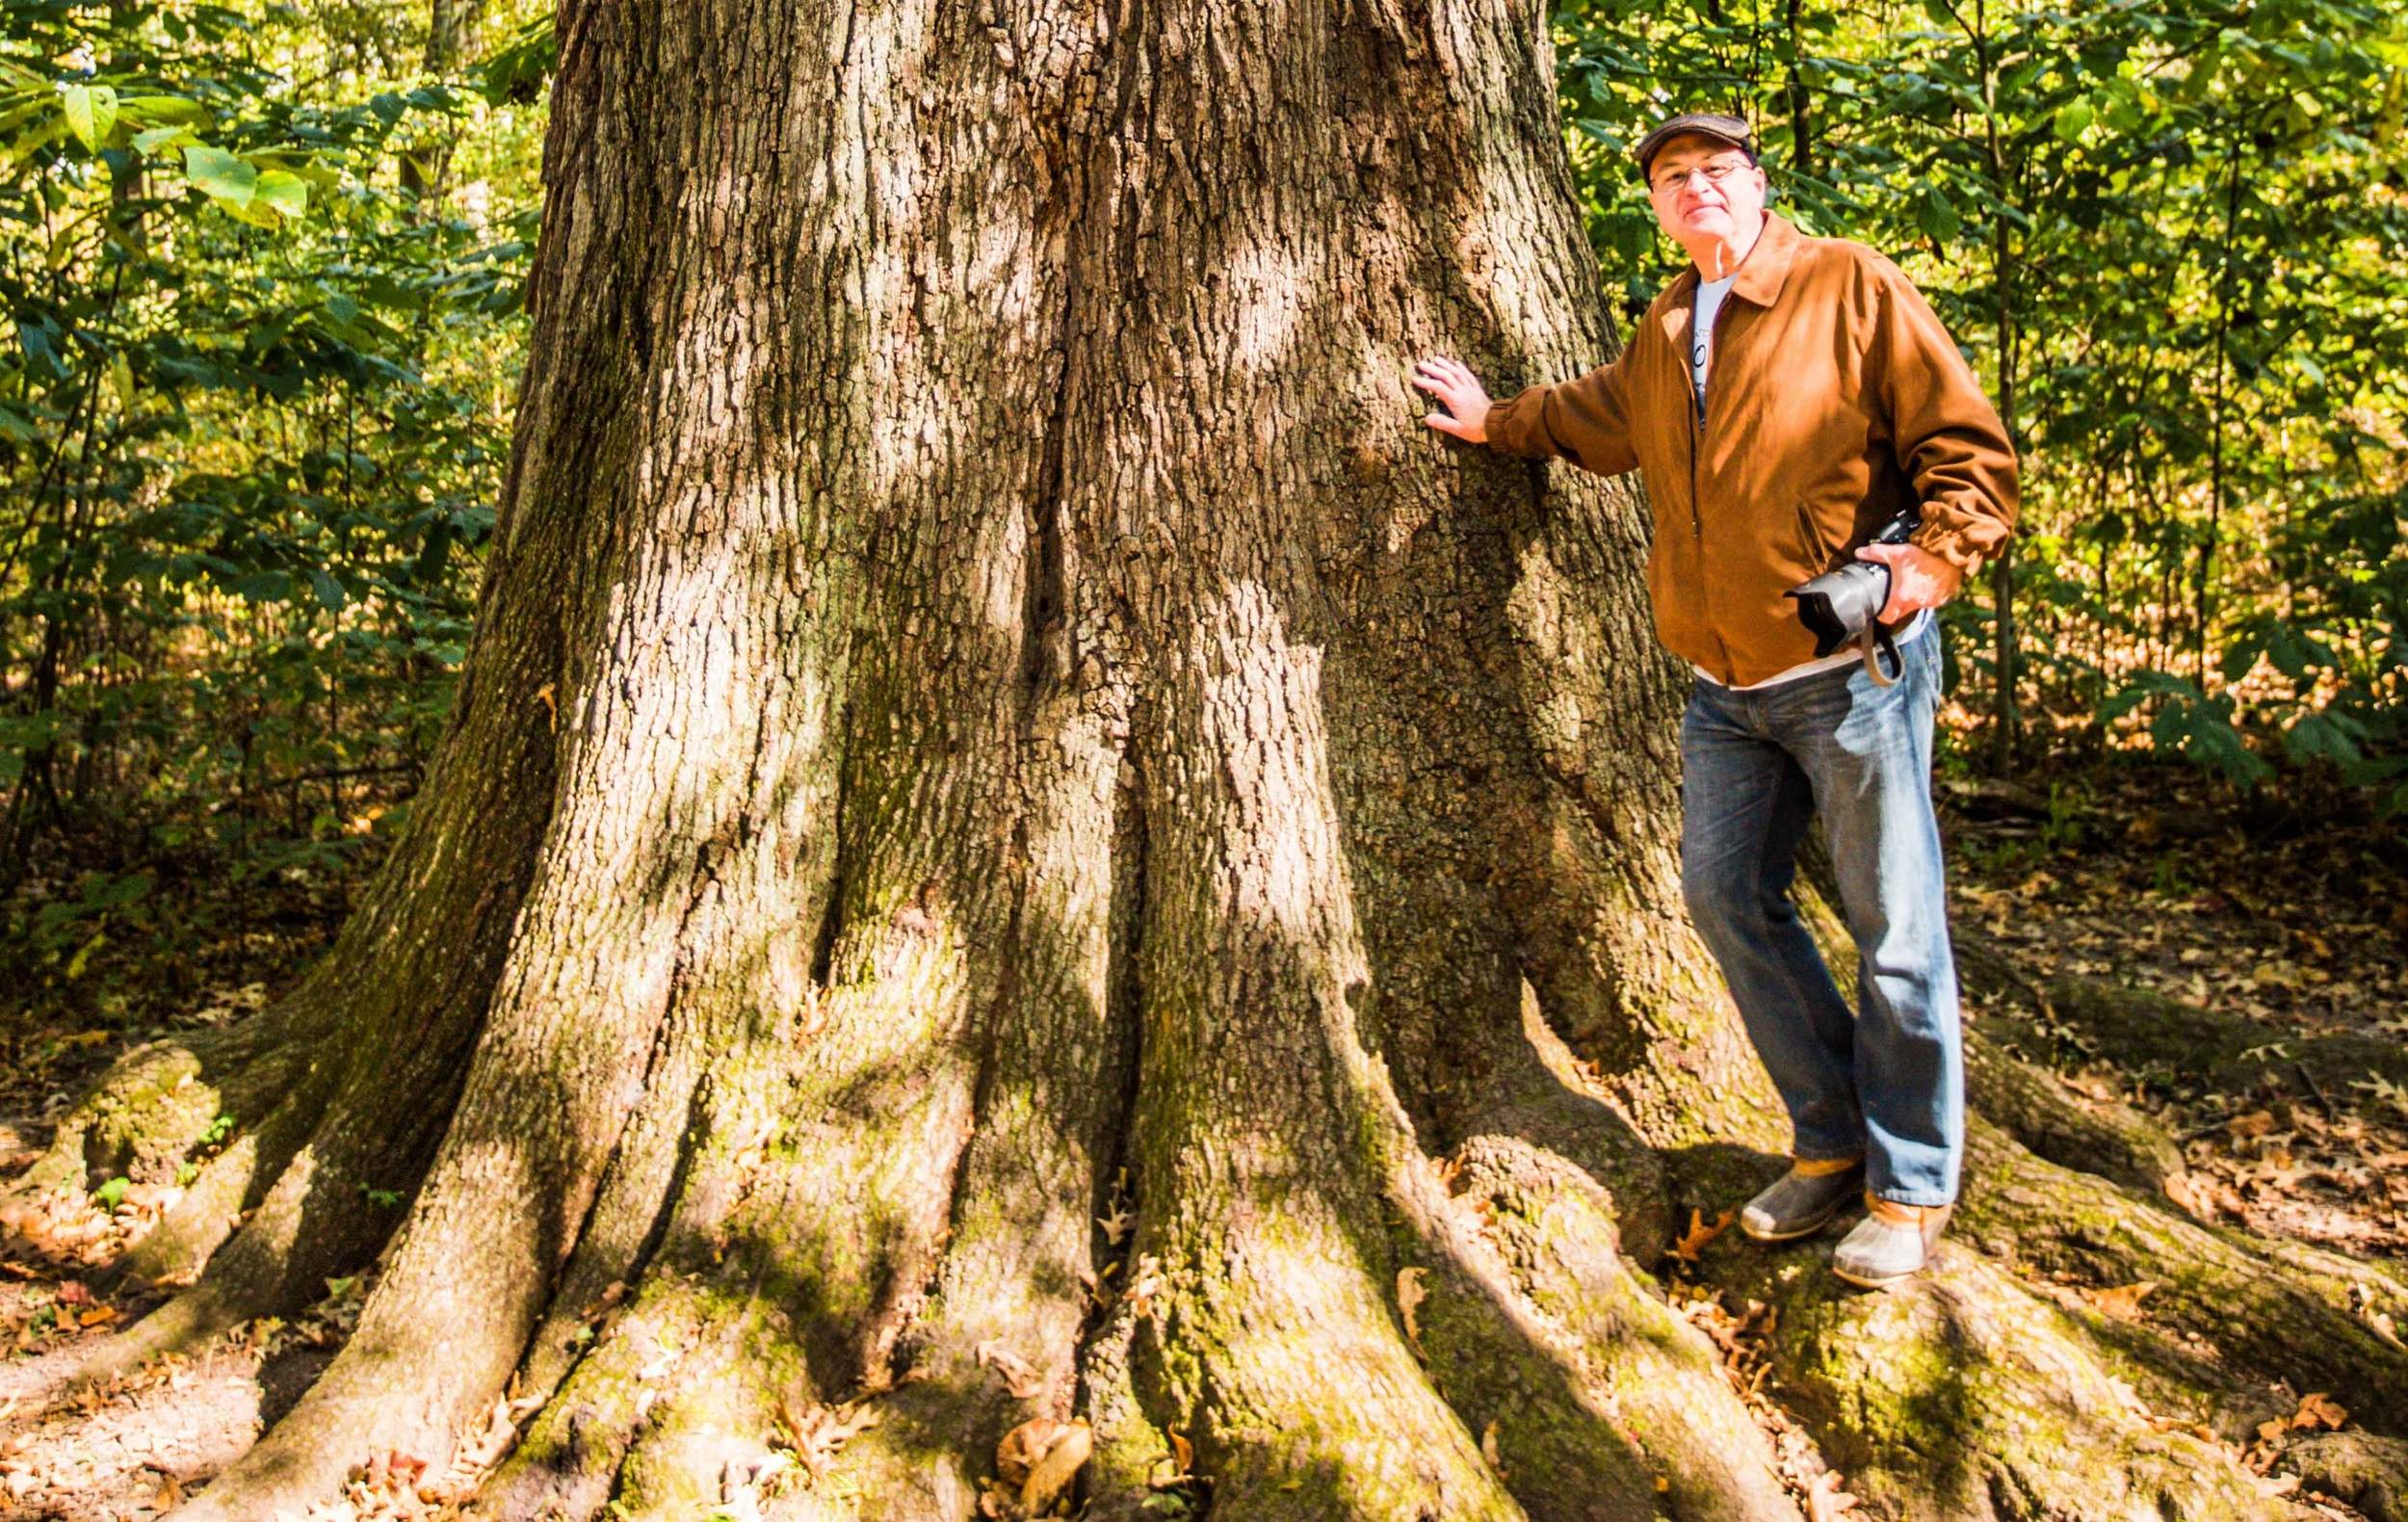 A man leaning on the State Champion Cherrybark Oak at Cache River Wetlands